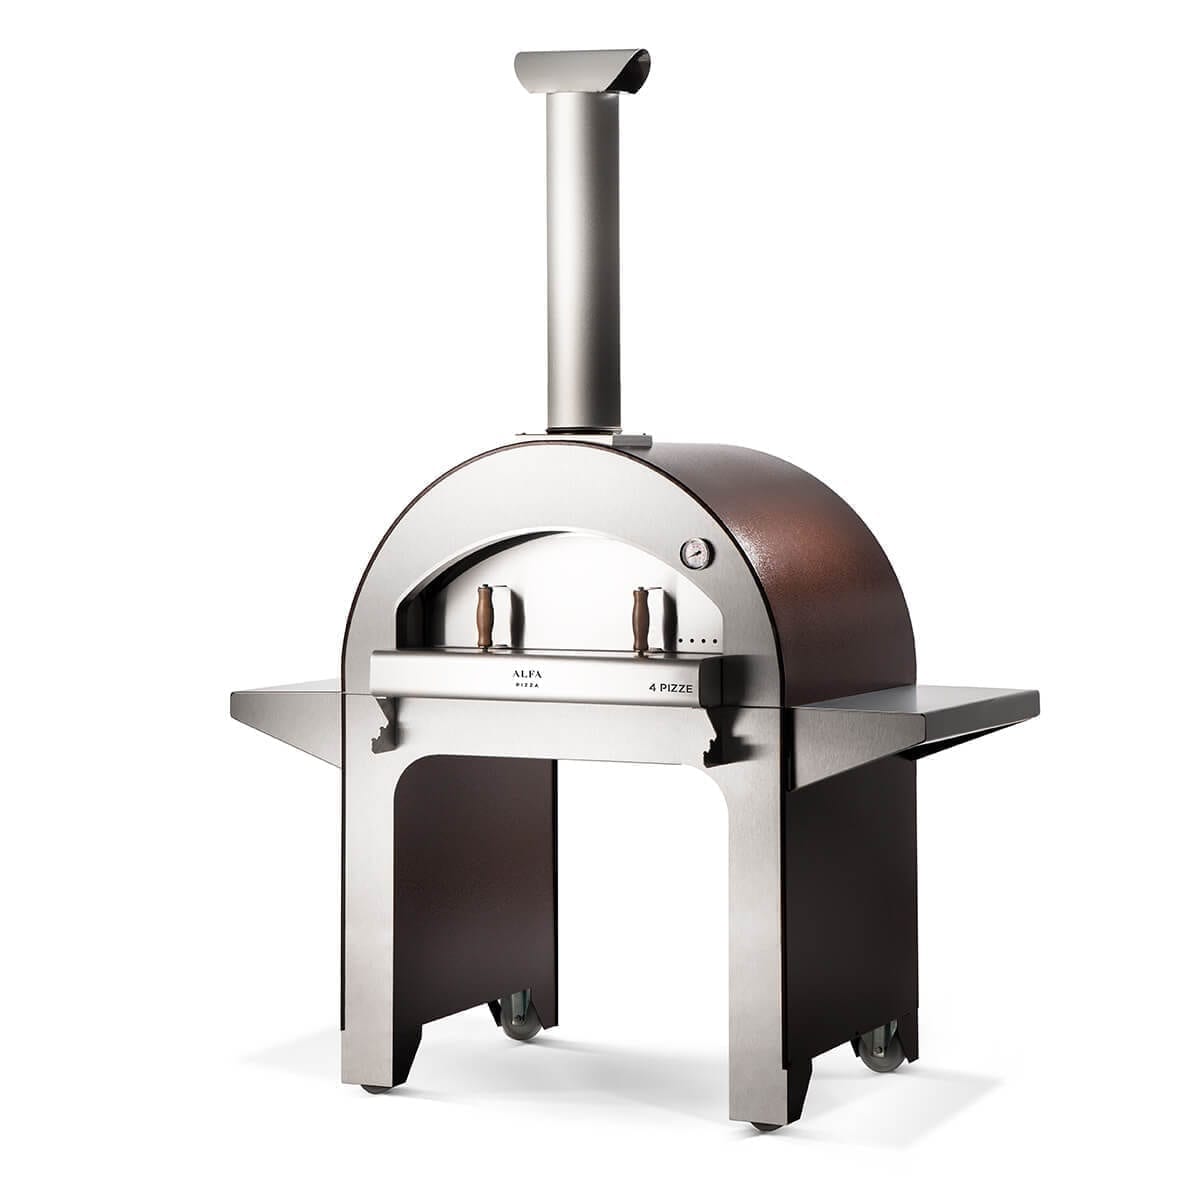 Large Wood Fired Pizza Oven w Base